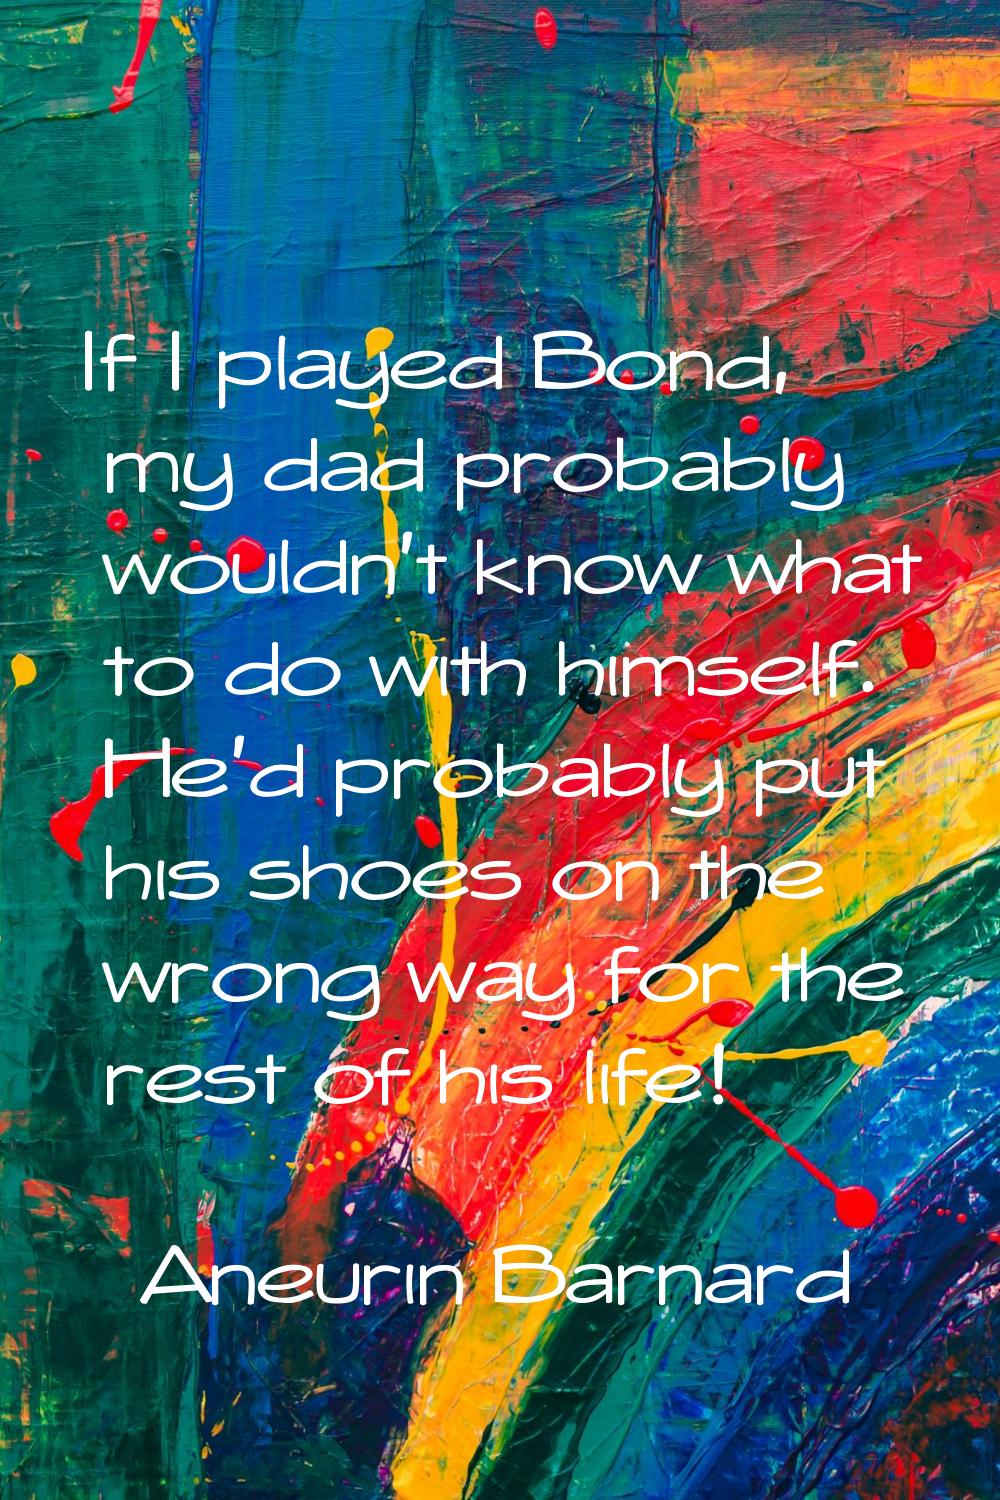 If I played Bond, my dad probably wouldn't know what to do with himself. He'd probably put his shoe